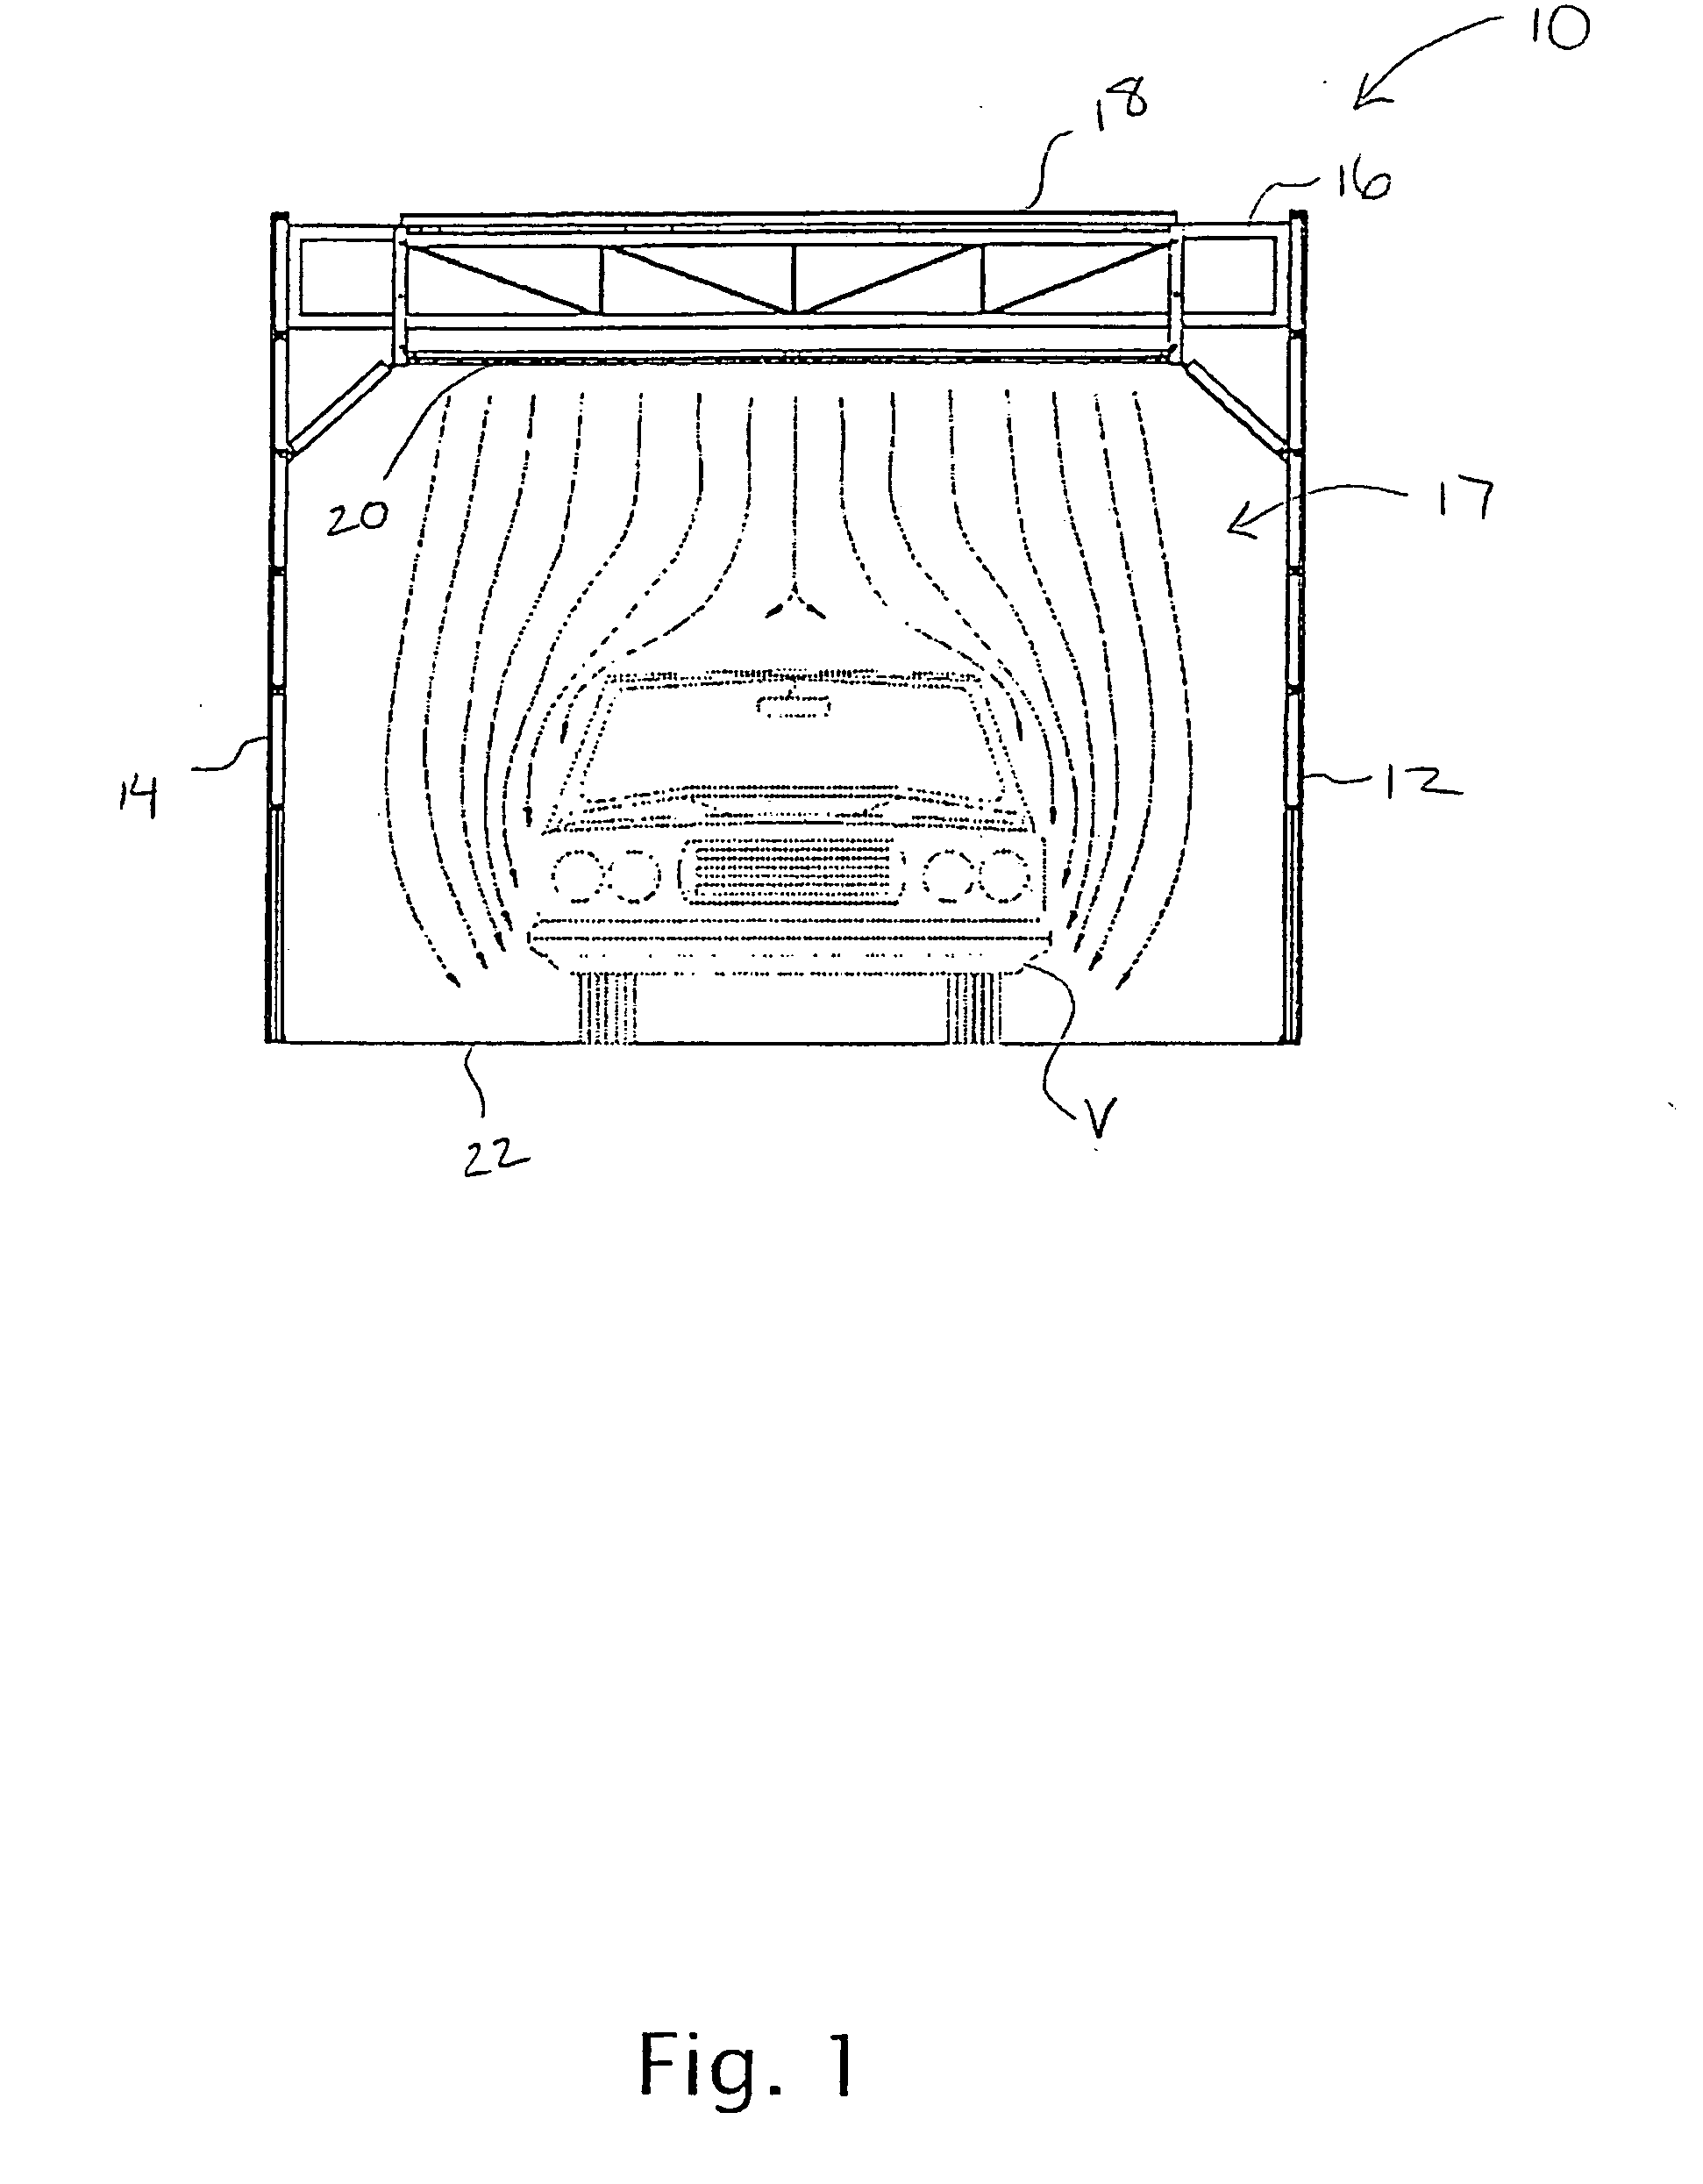 Spray booth systems and methods for accelerating curing times